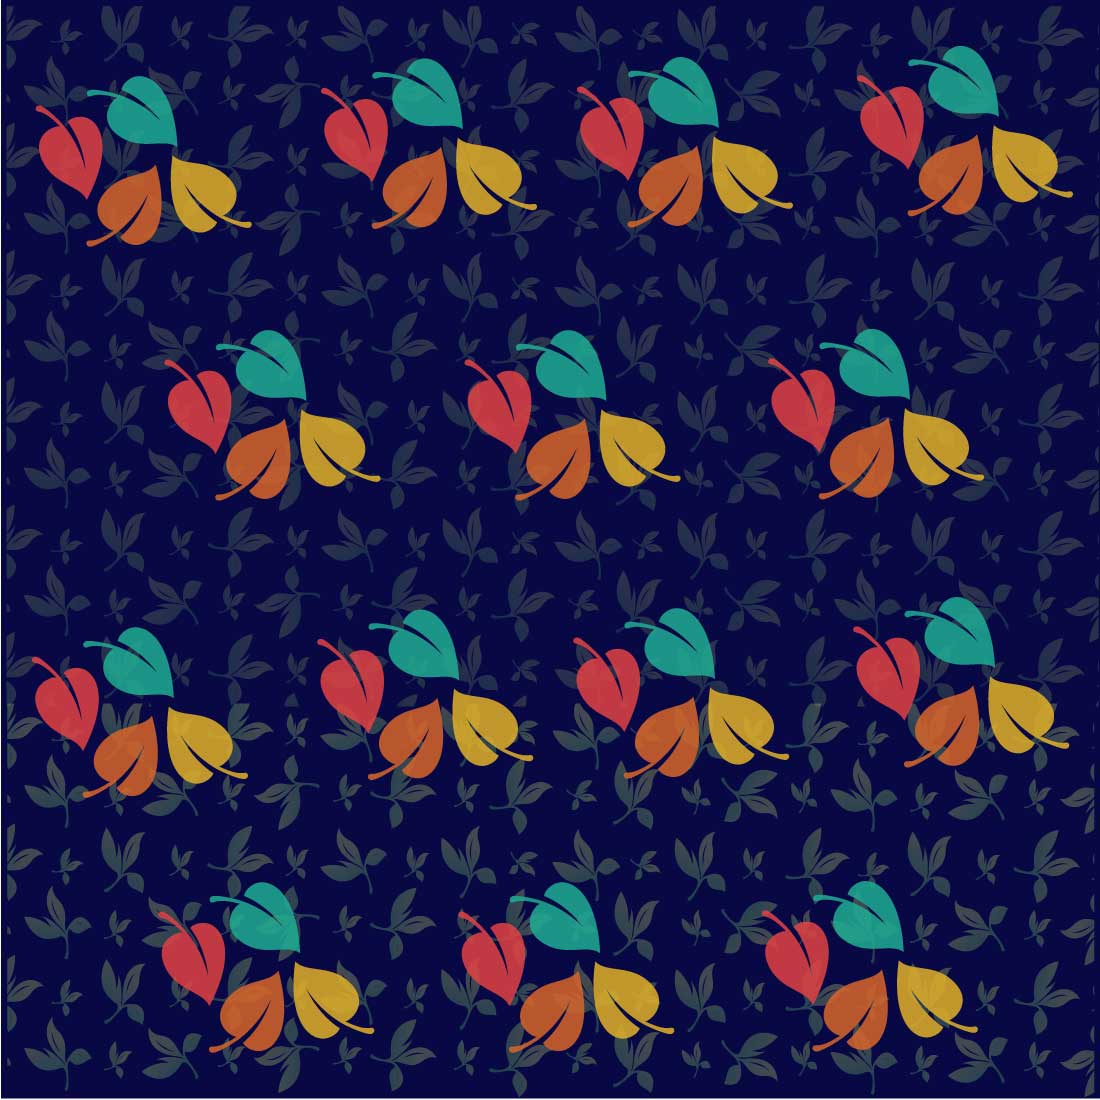 Autumn leaves pattern, and background for print on fabric, surface, paper, wrapping preview image.